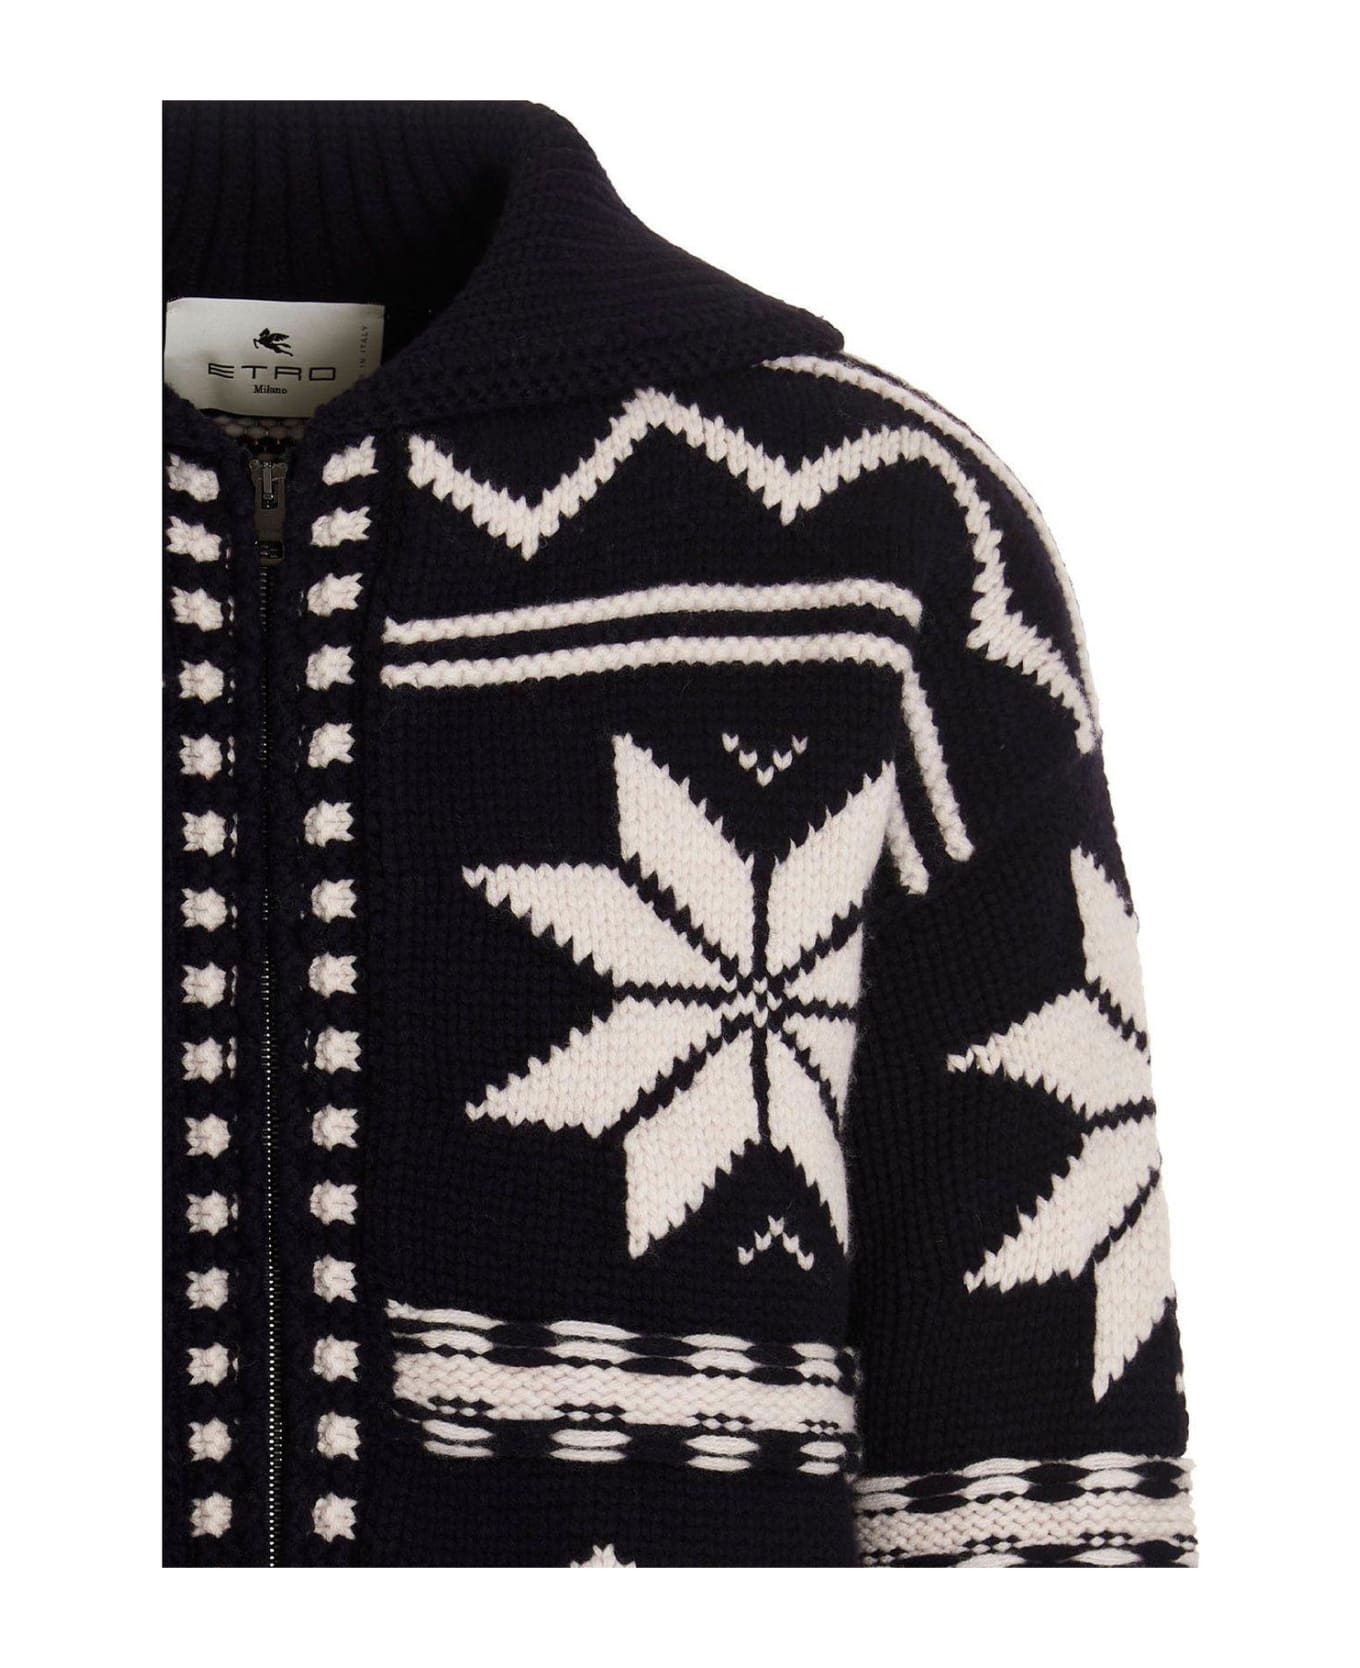 Etro Graphic Knitted Zip-up Jacket - NAVY カーディガン